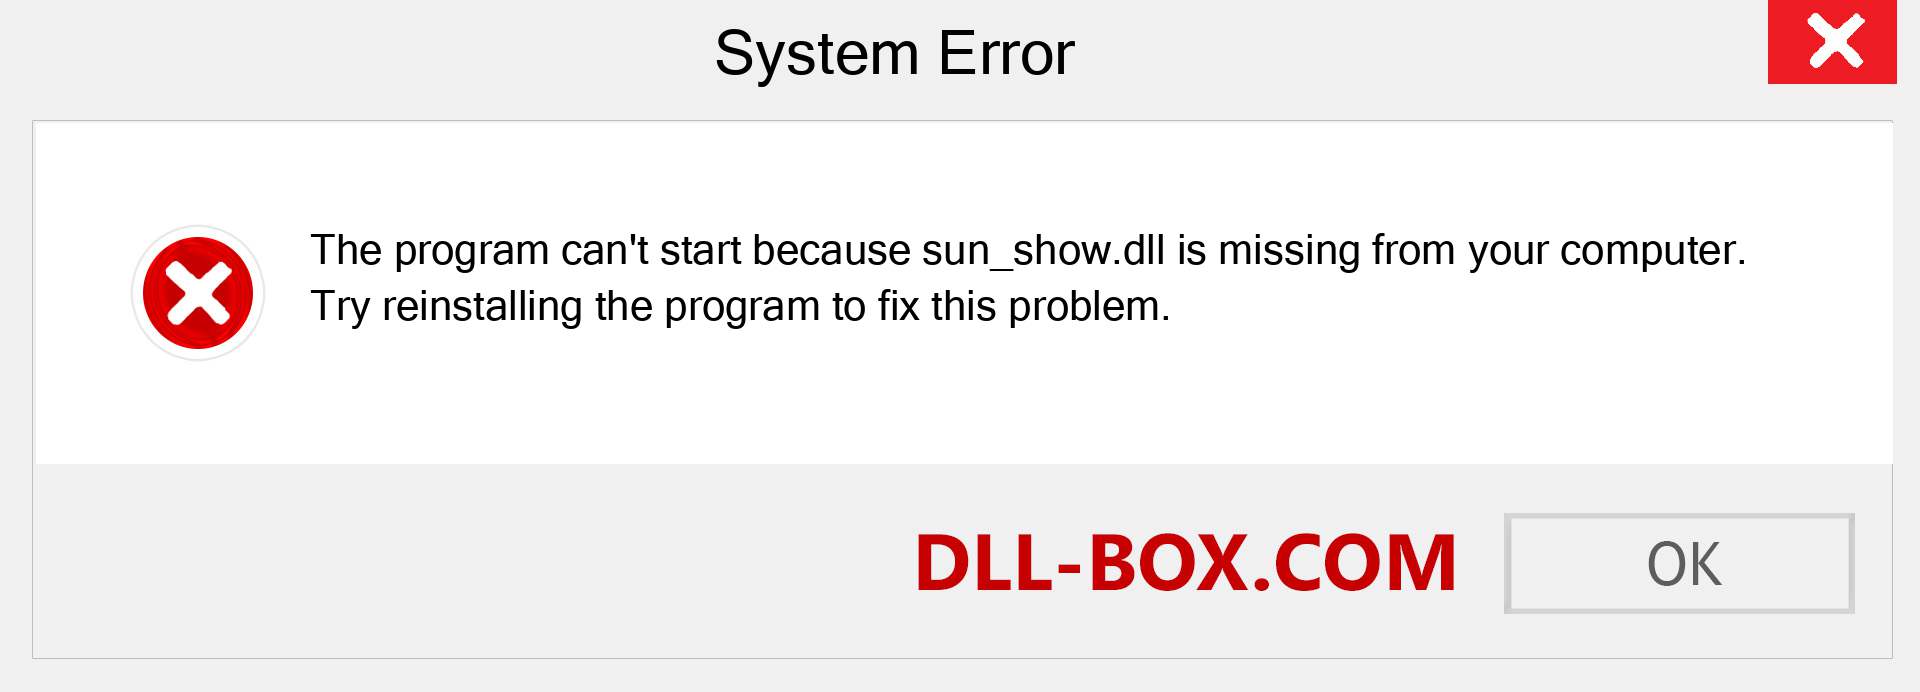  sun_show.dll file is missing?. Download for Windows 7, 8, 10 - Fix  sun_show dll Missing Error on Windows, photos, images